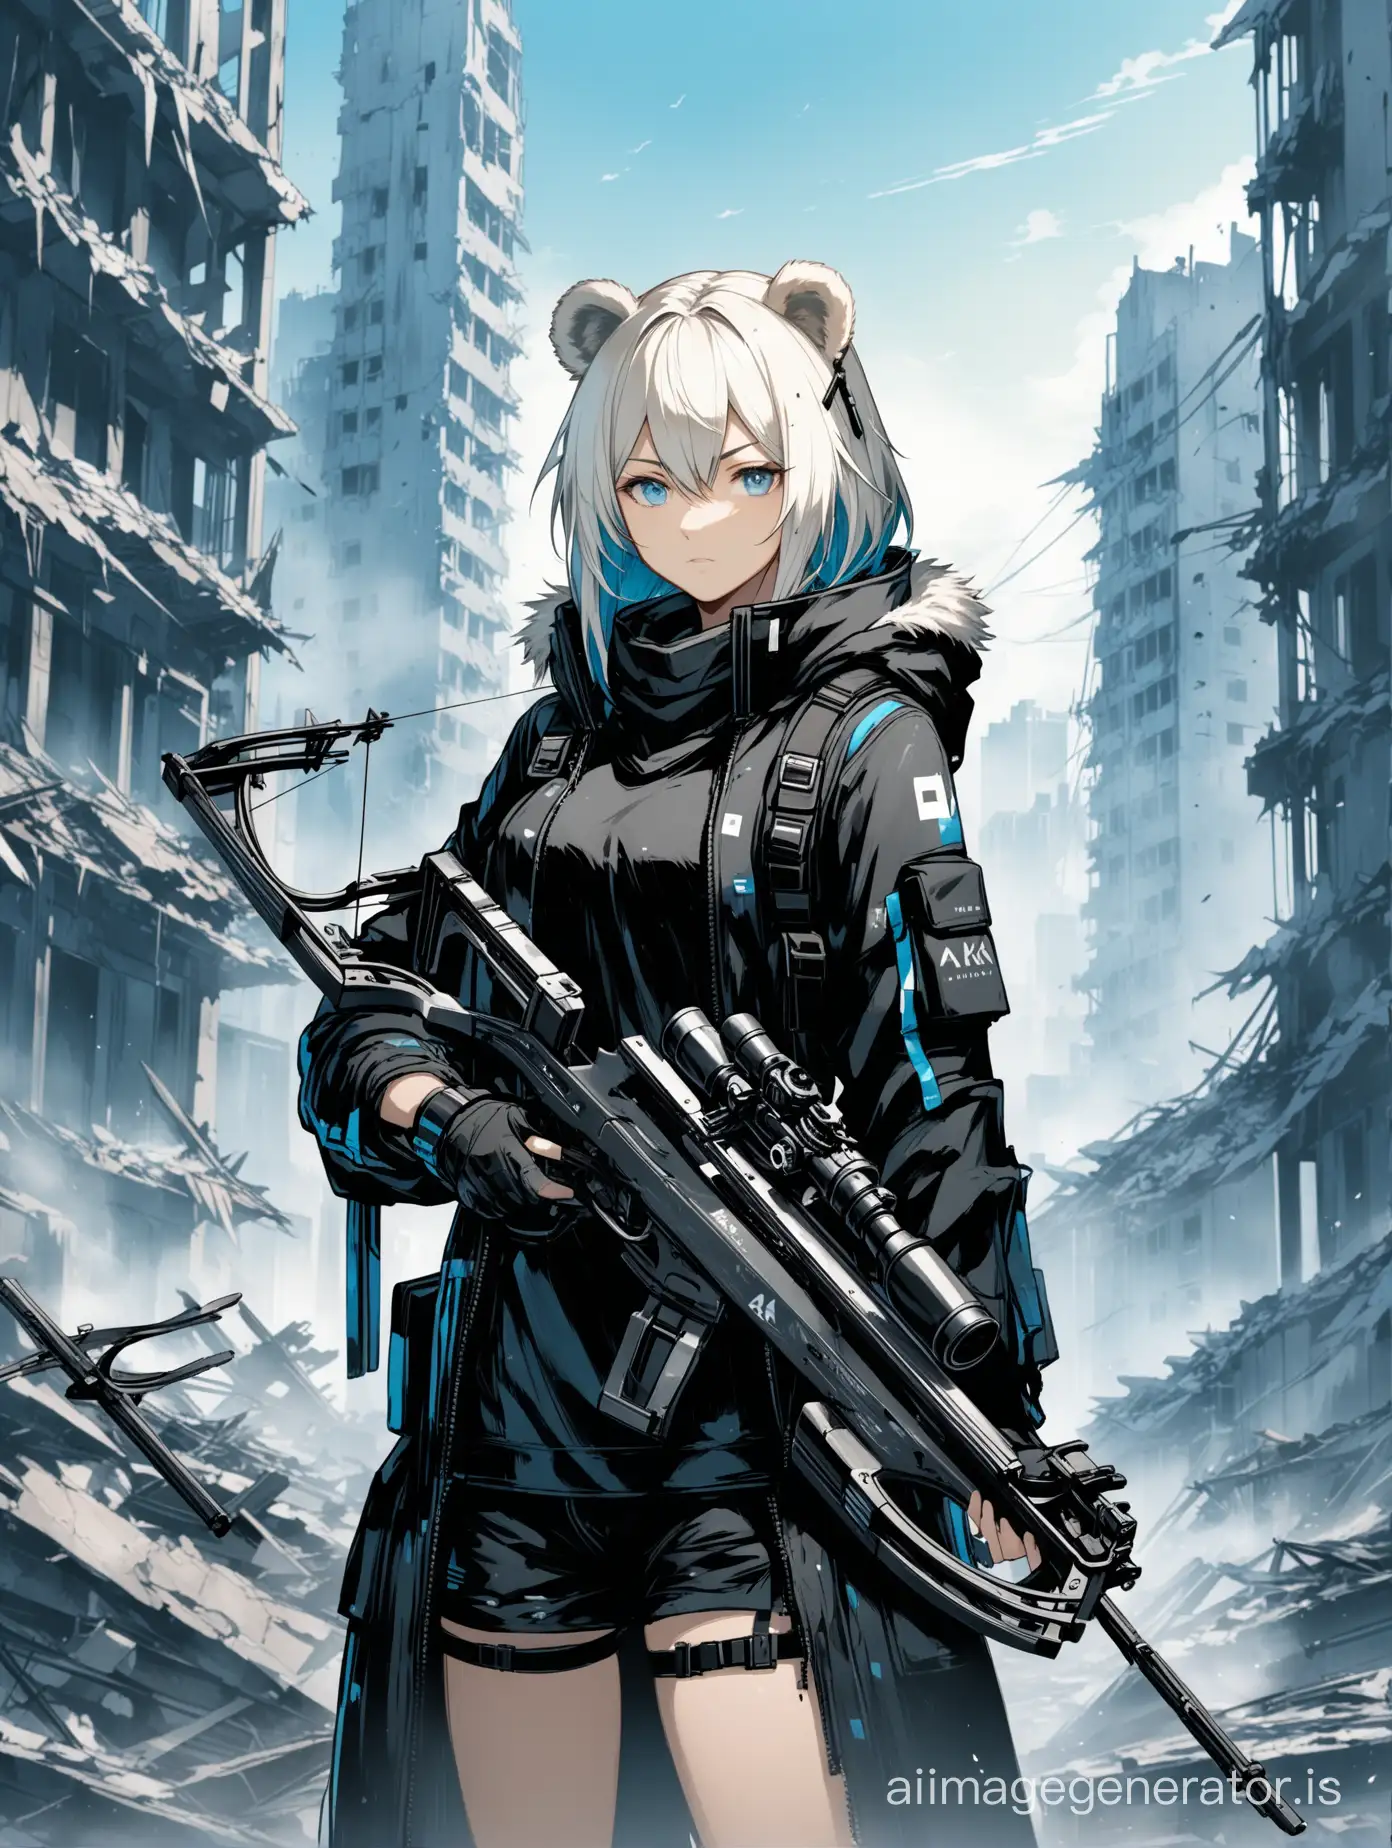 Ursus-Girl-with-Crossbow-in-PostApocalyptic-Cityscape